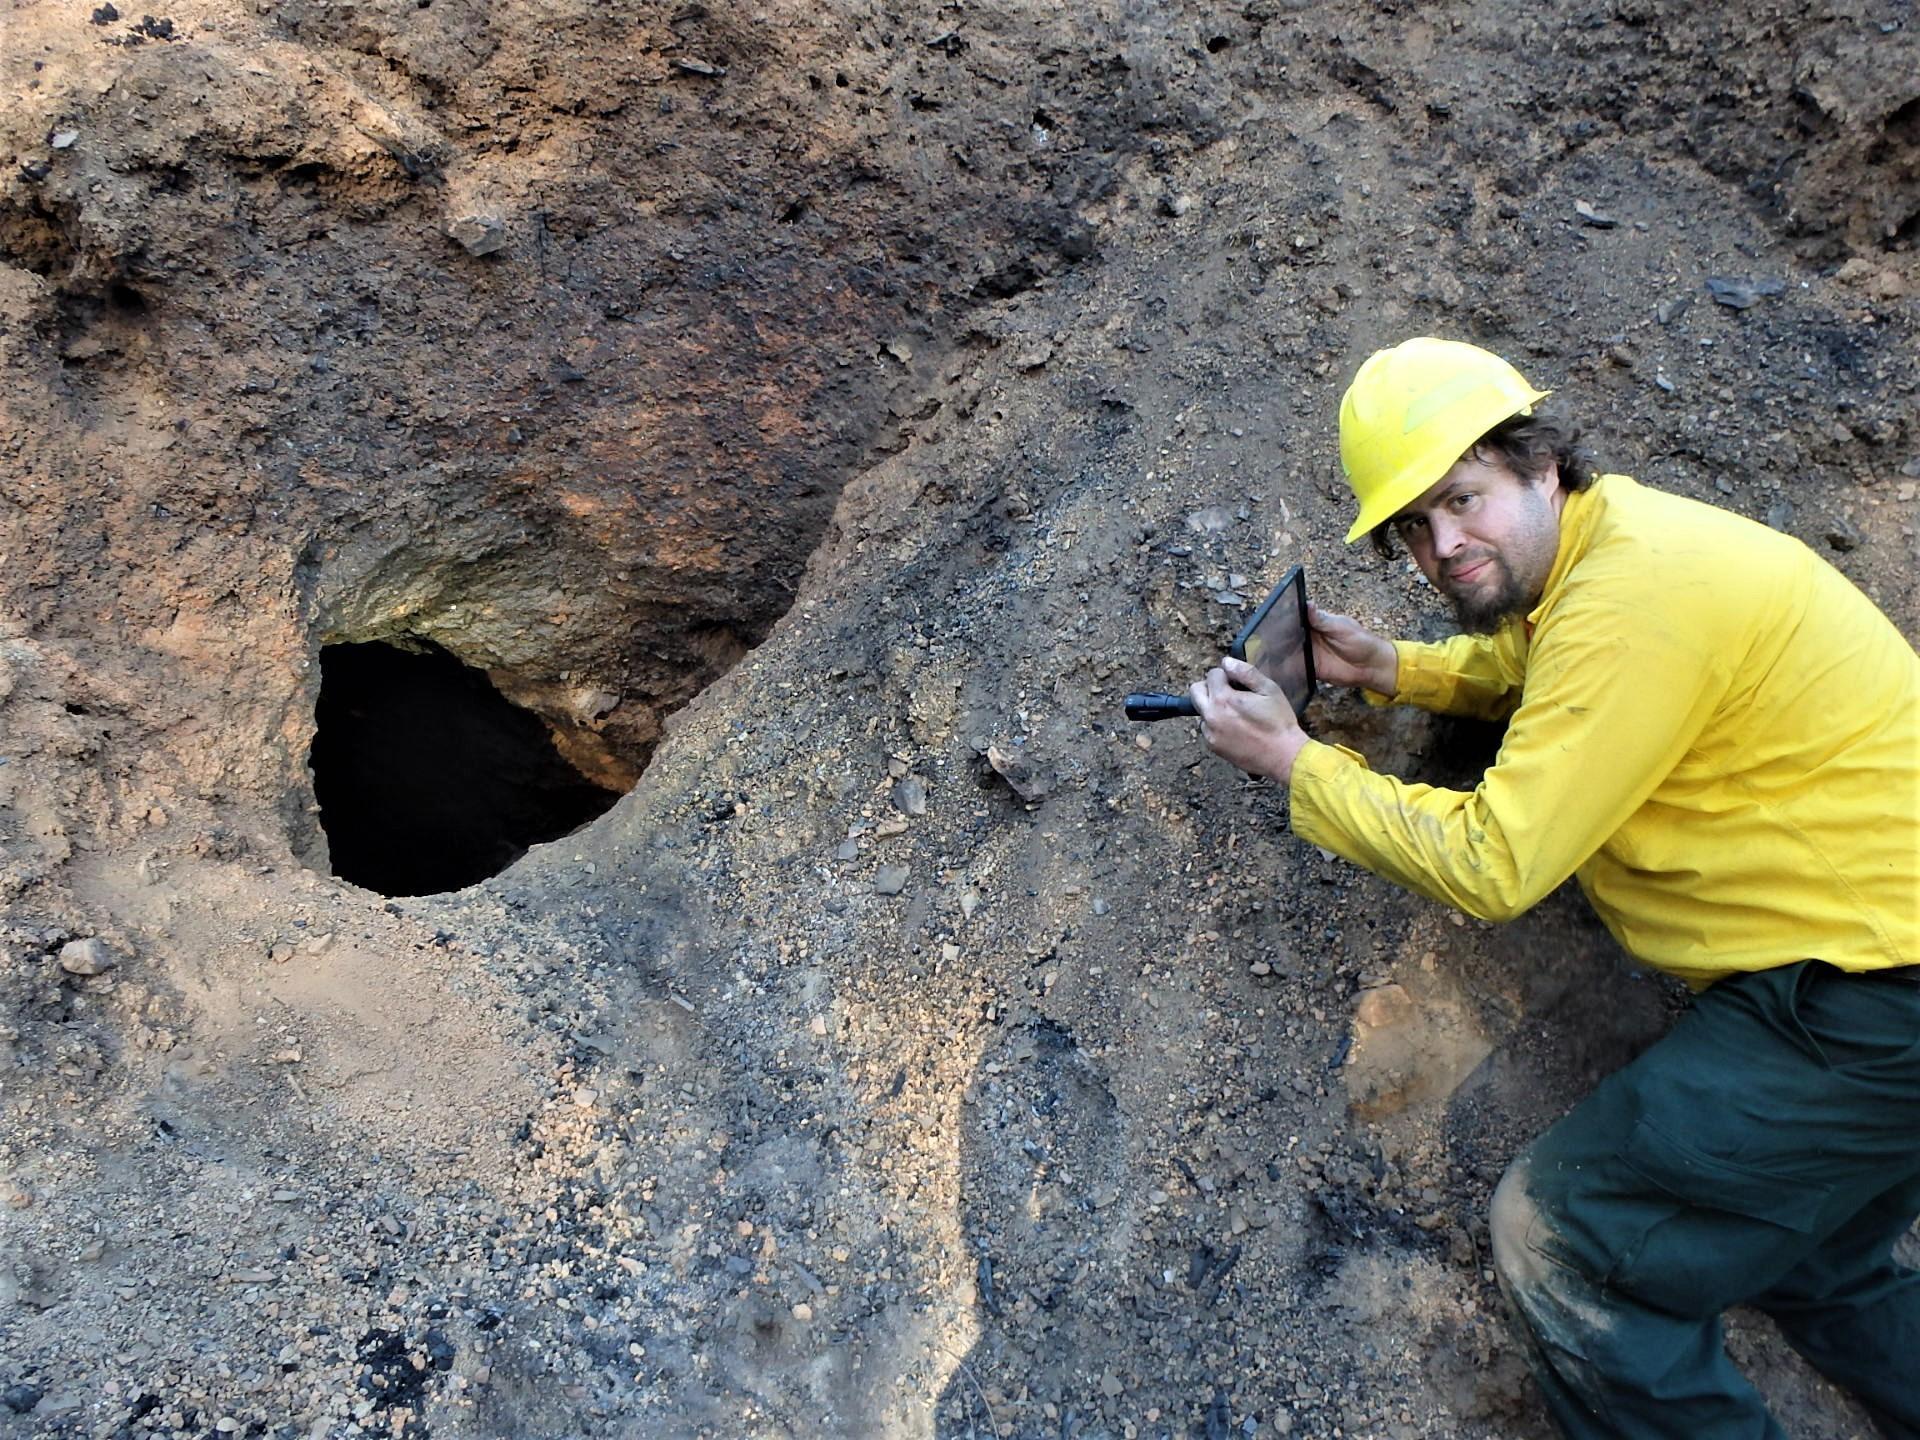 Image showing BAER abandoned mine specialist Jeremy Olsen  recording information at hazardous mine opening near the Western States Trail in Mosquito burned area